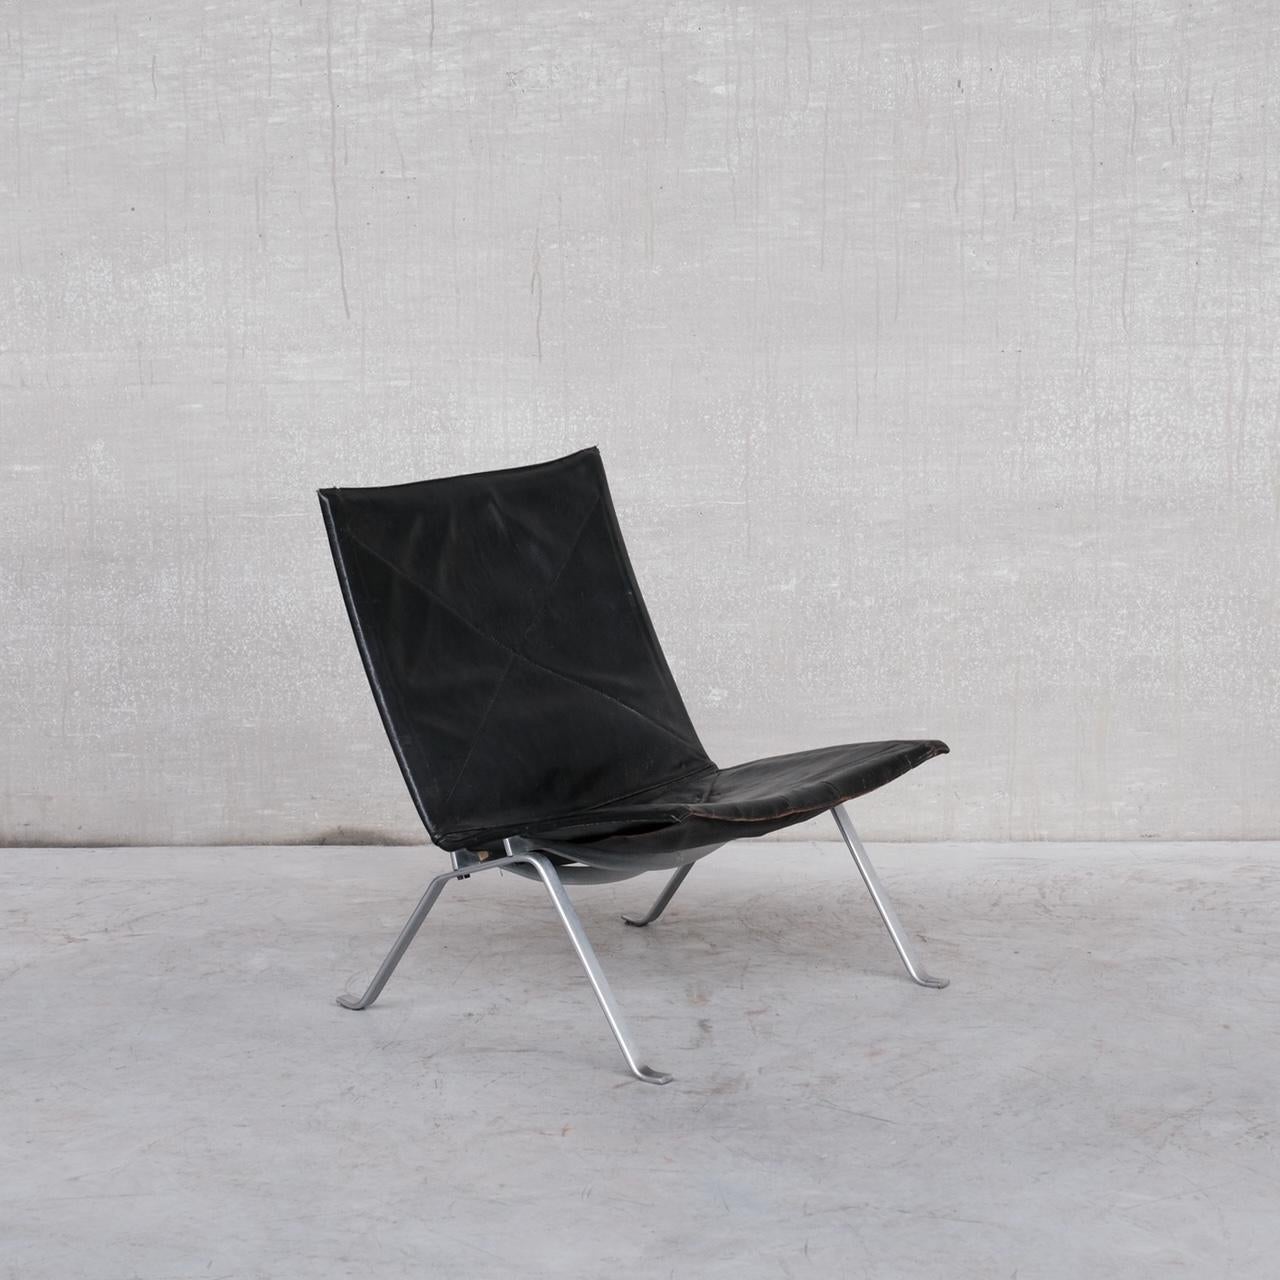 A pair of stylish and comfortable PK22 lounge chairs by Poul Kjærholm for E. Kold Christensen. 

Not later Fritz Hansen edition, these are early edition sets. 

Denmark, c1956. 

Steel frame with original black leather. 

The leather has